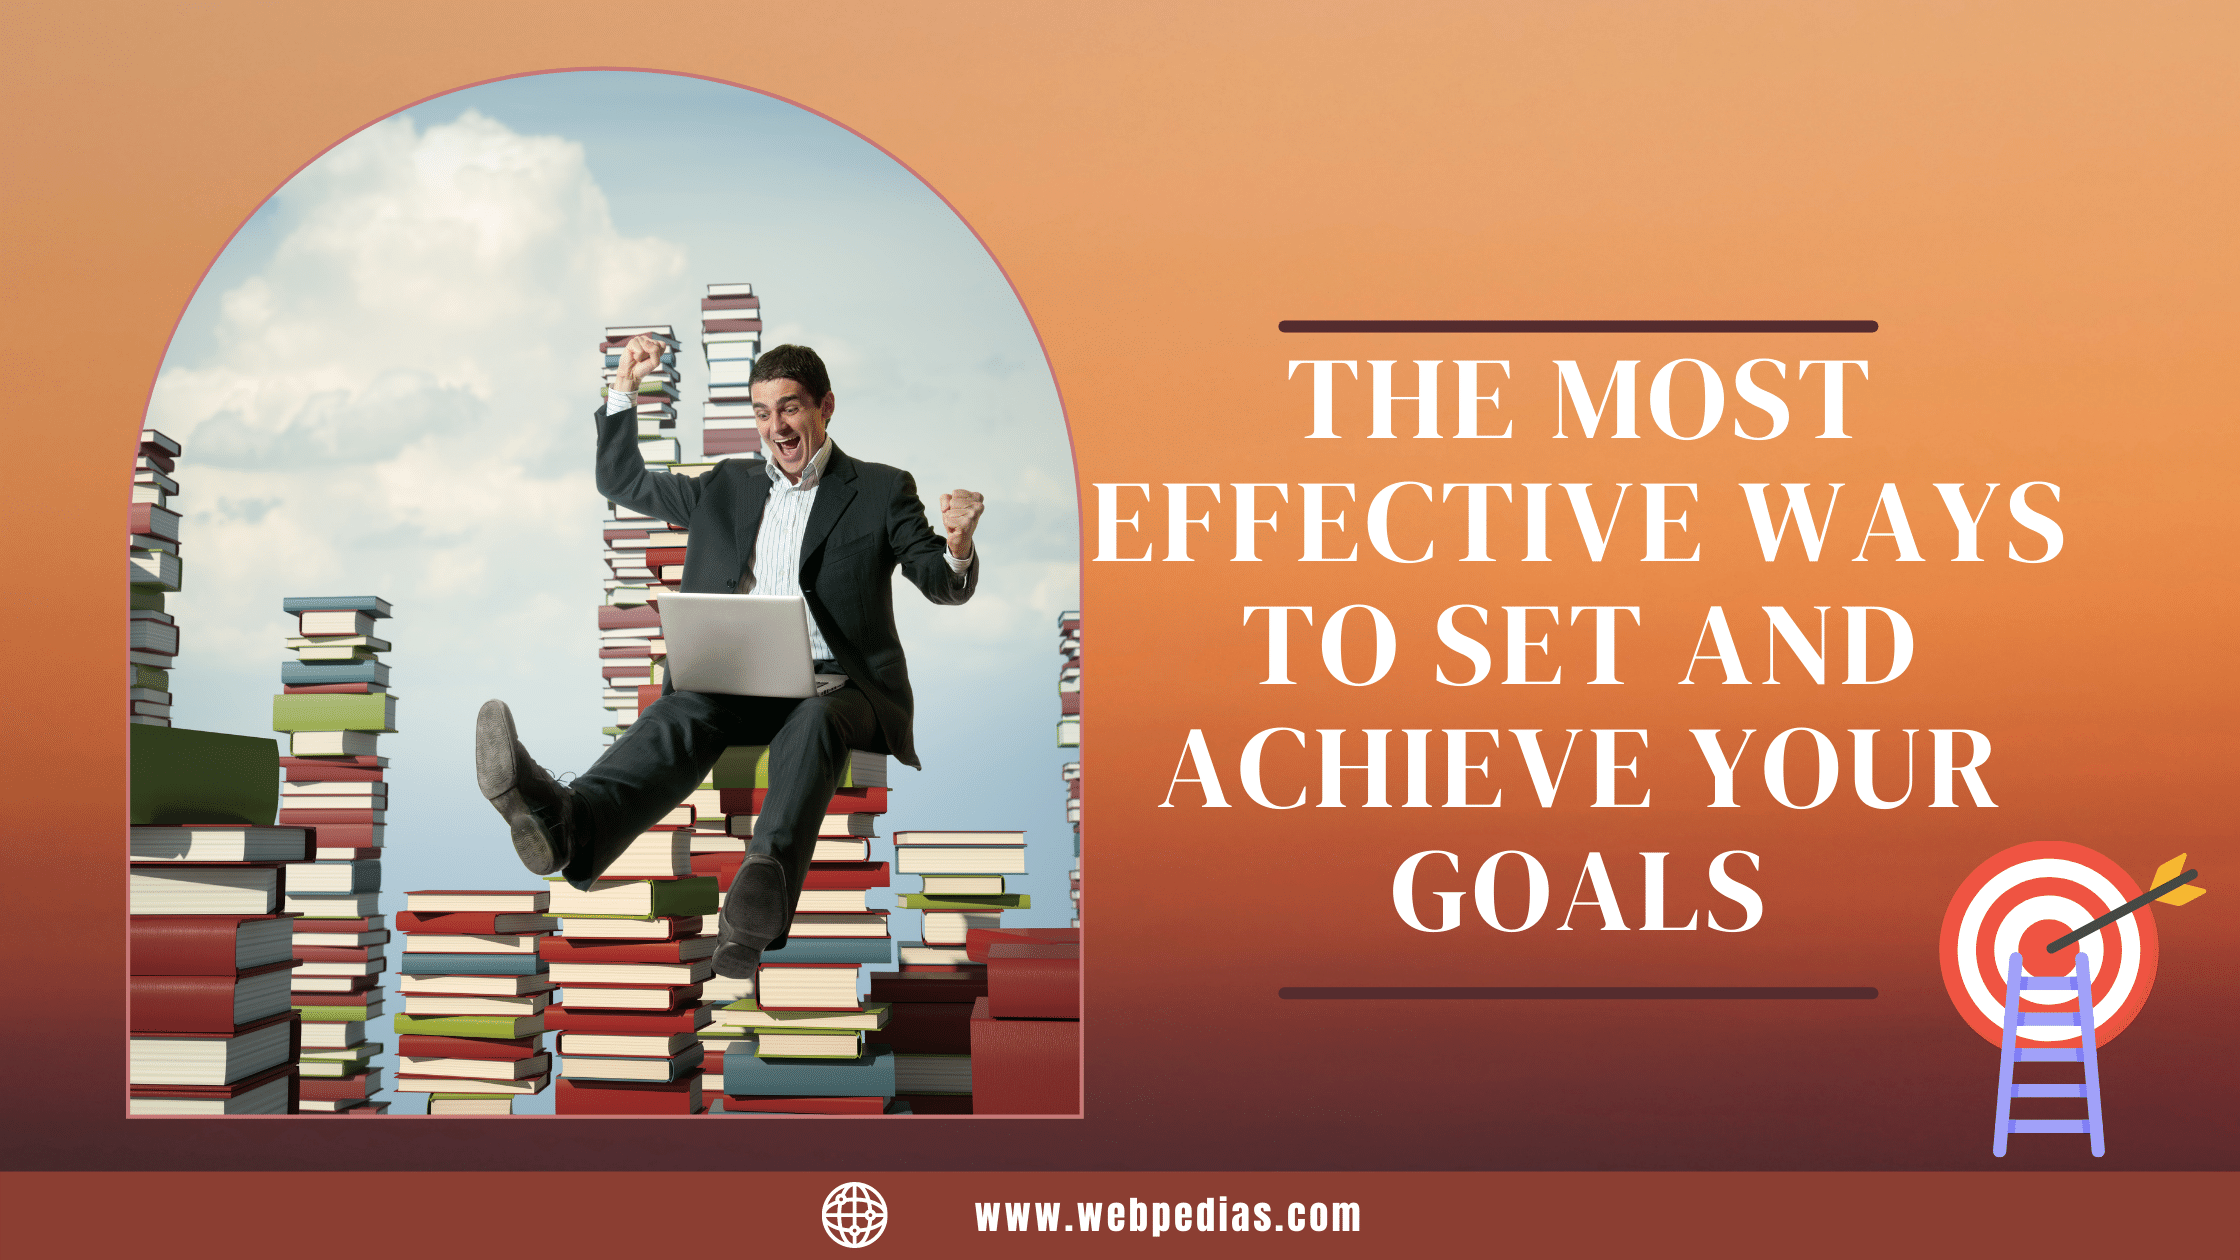 The Most Effective Ways To Set And Achieve Your Goals